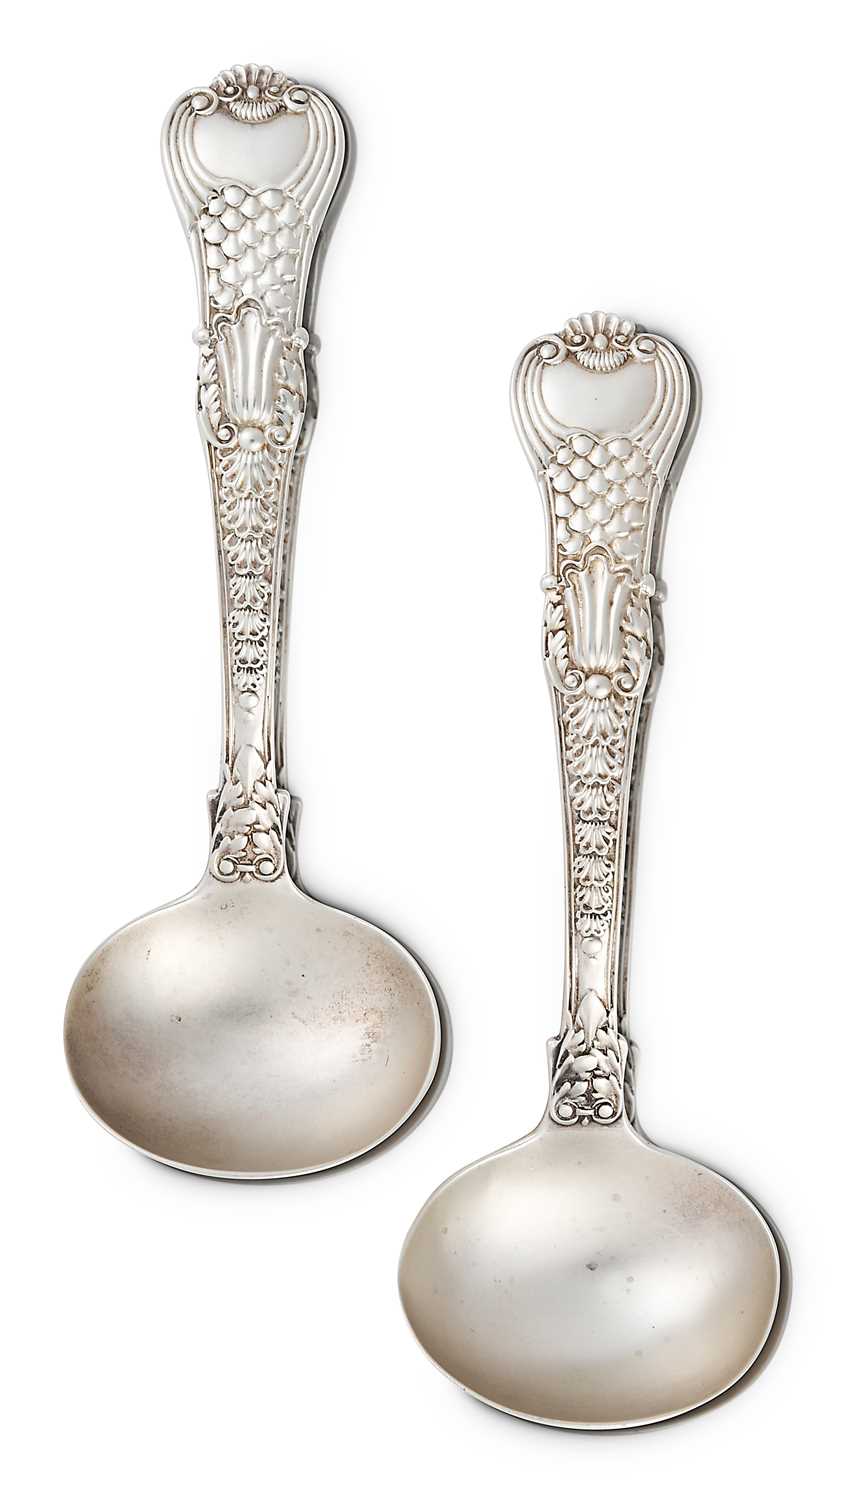 Lot 2029 - A Pair of William IV Silver Sauce-Ladles